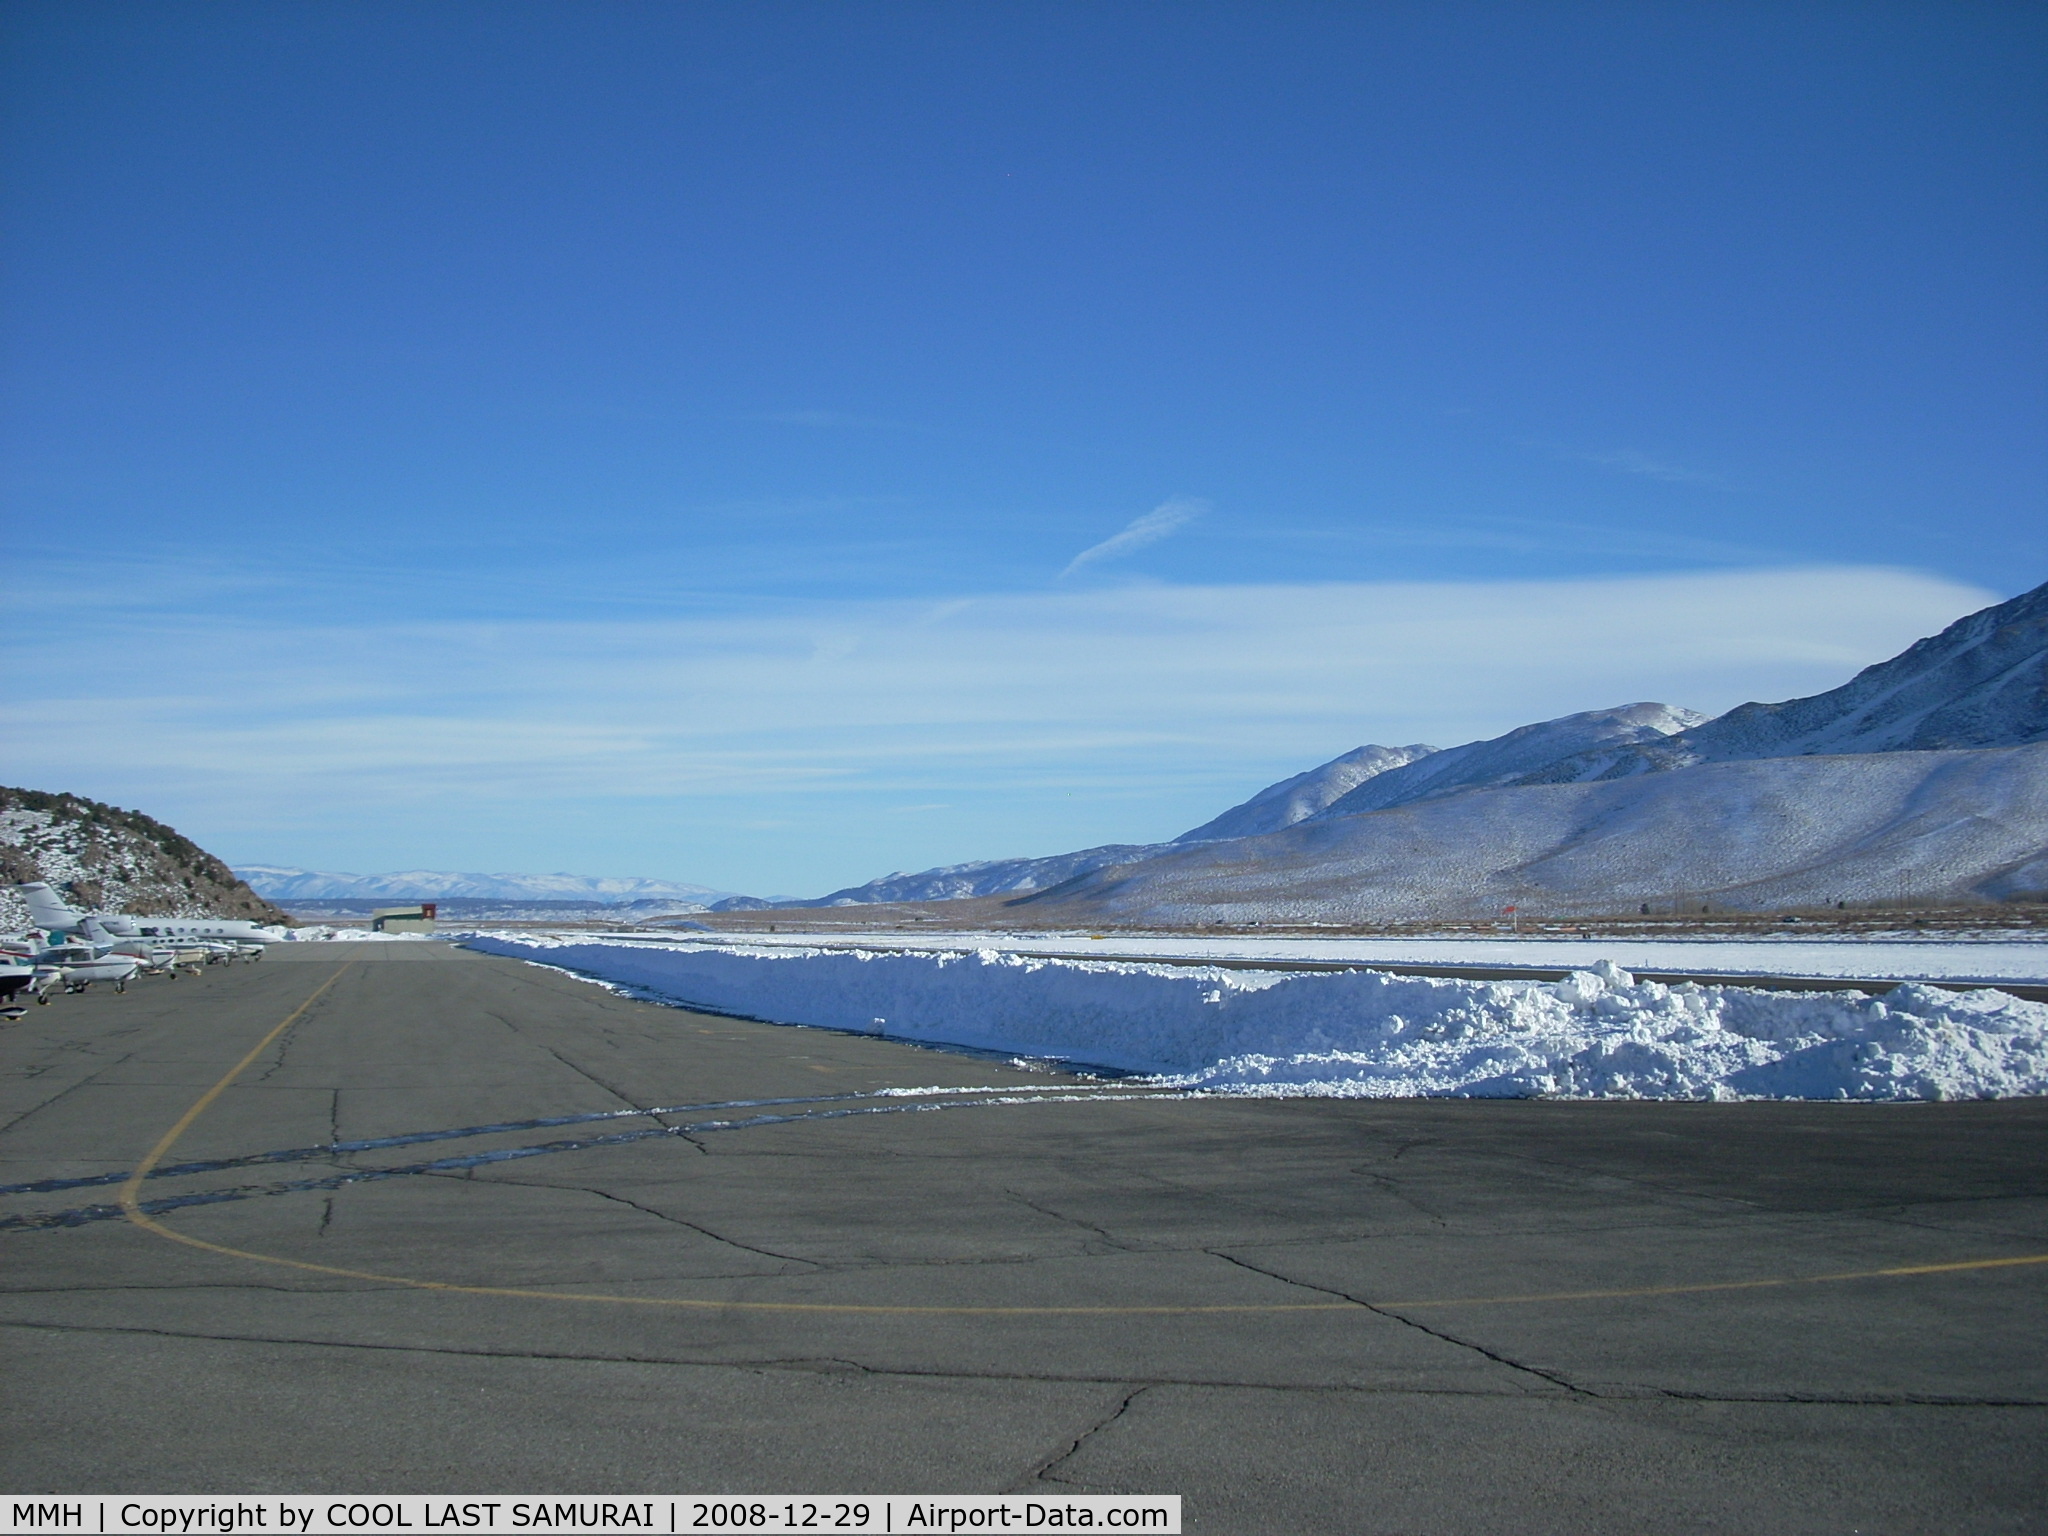 Mammoth Yosemite Airport (MMH) - A view from self-service fuel pit